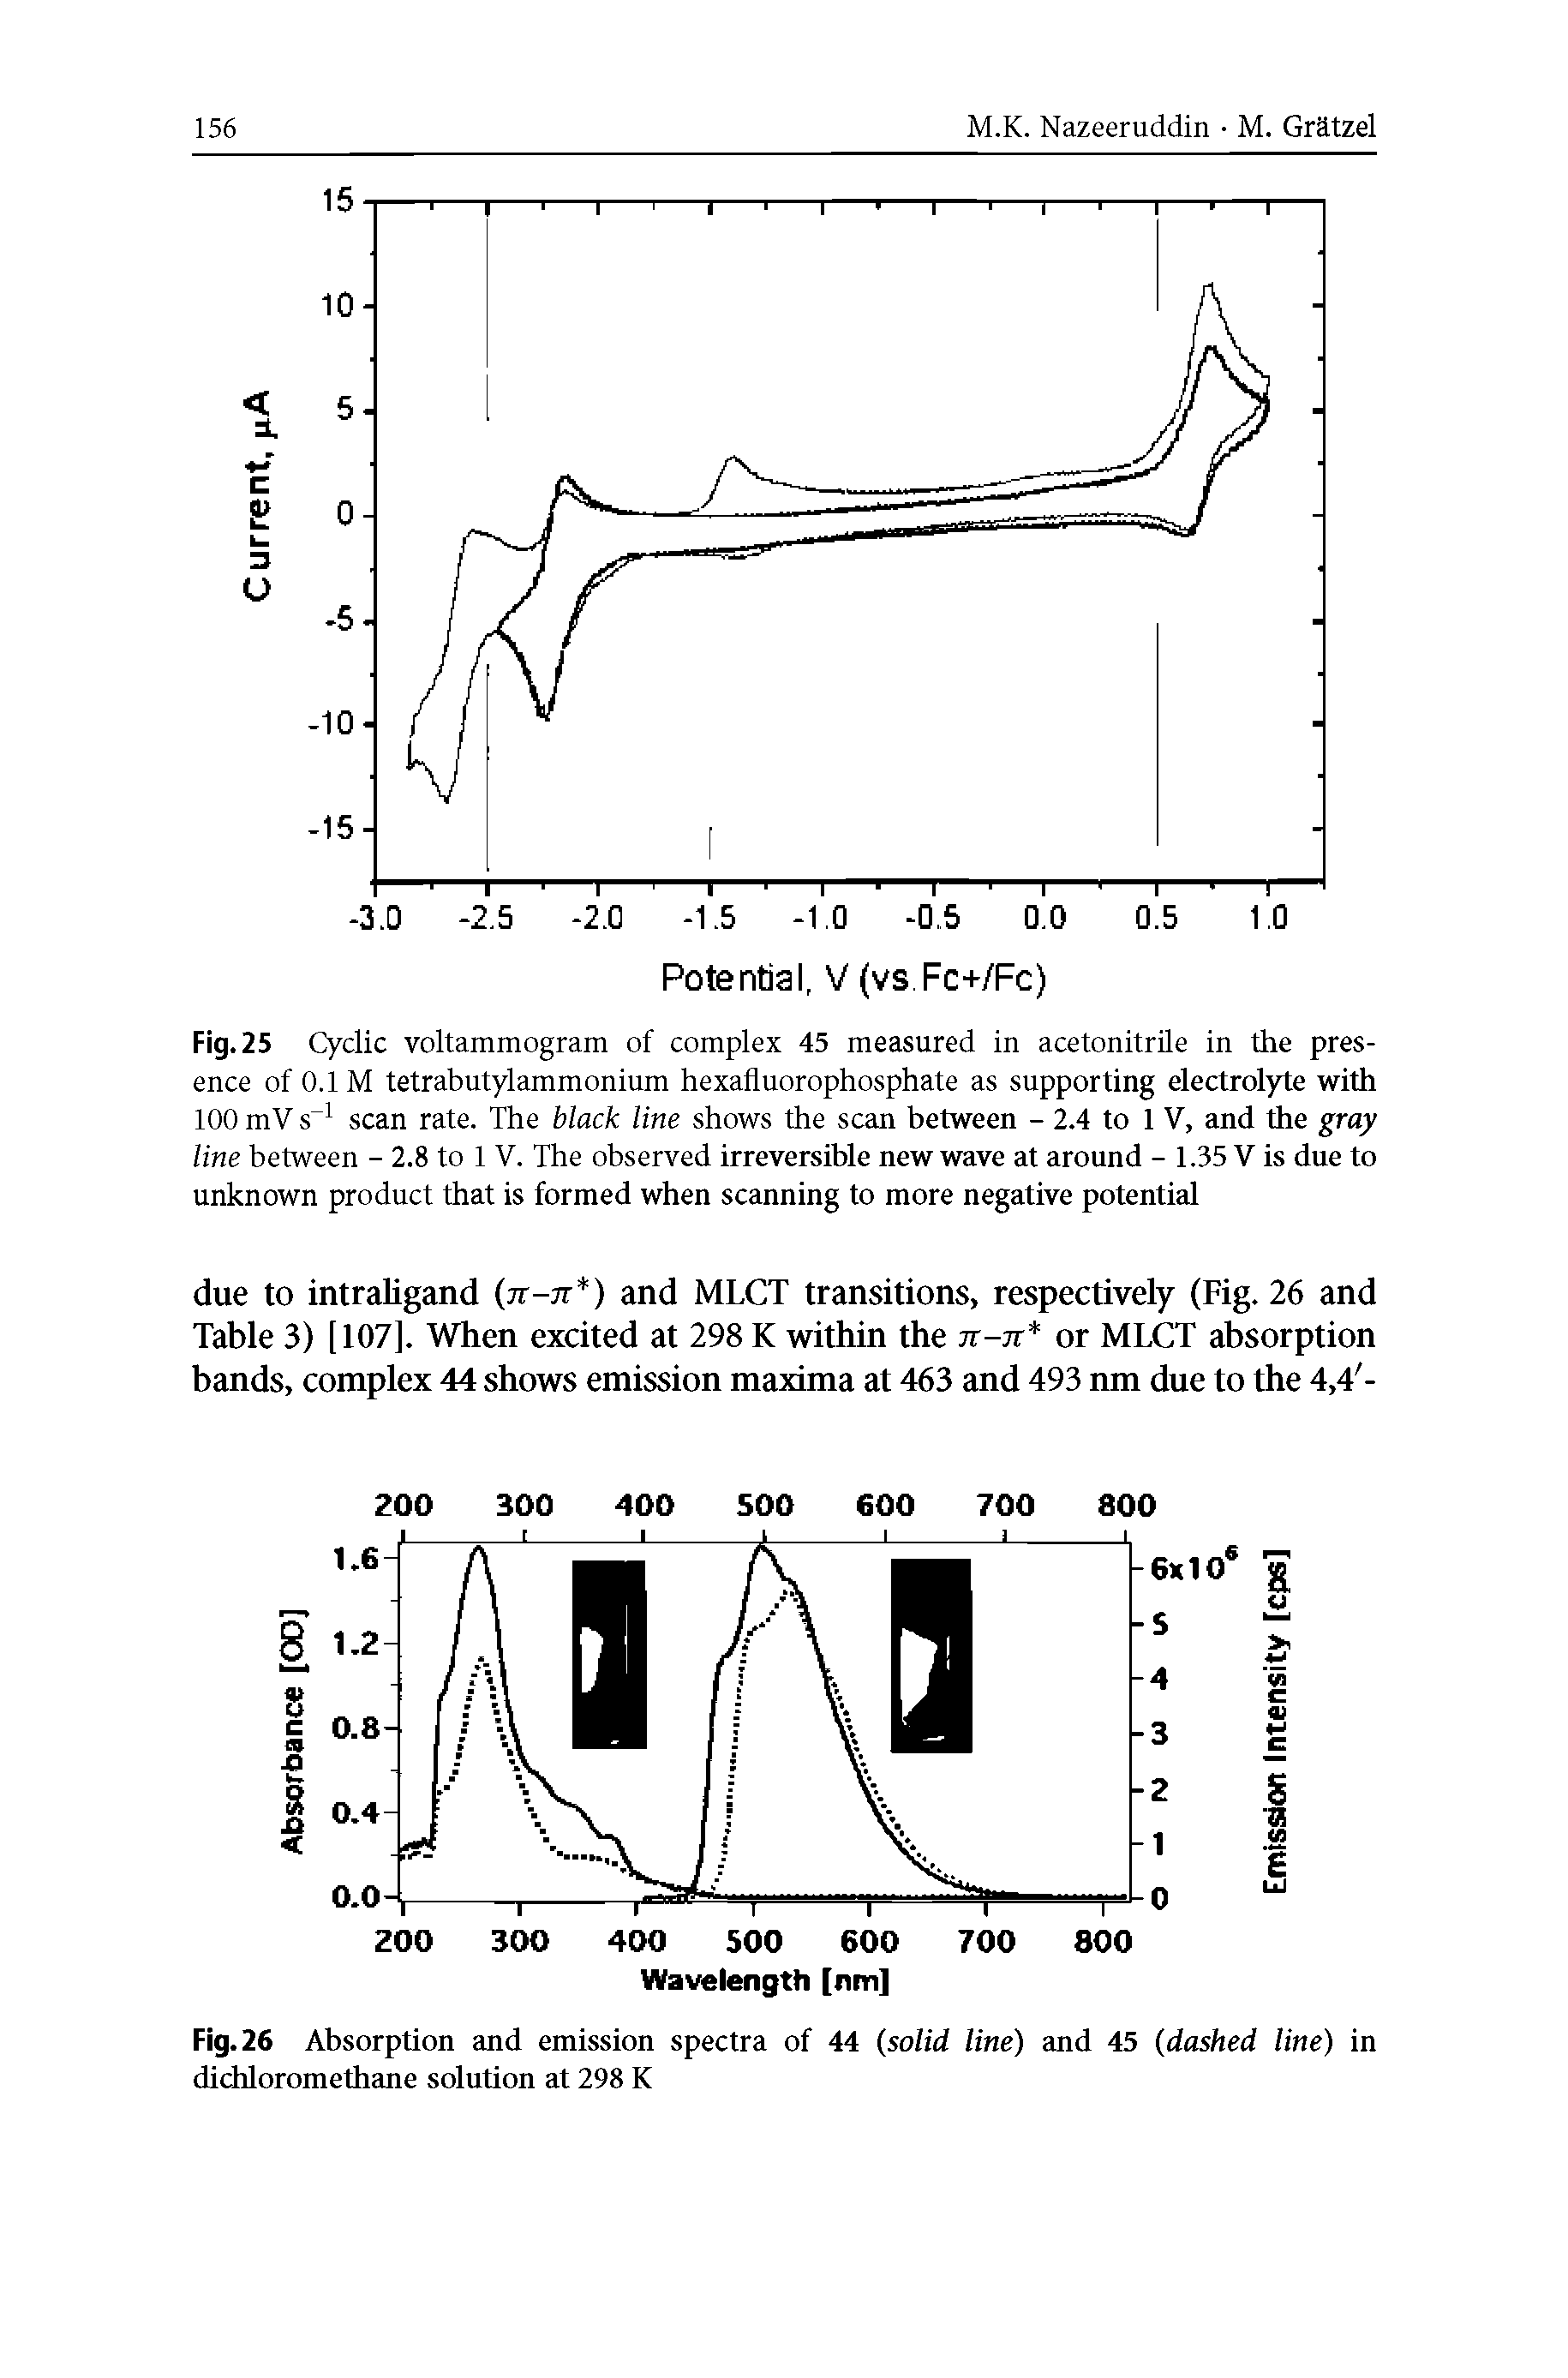 Fig. 25 Cyclic voltammogram of complex 45 measured in acetonitrile in the presence of 0.1 M tetrabutylammonium hexafluorophosphate as supporting electrolyte with 100 mV s 1 scan rate. The black line shows the scan between - 2.4 to 1 V, and the gray line between - 2.8 to 1 V. The observed irreversible new wave at around - 1.35 V is due to unknown product that is formed when scanning to more negative potential...